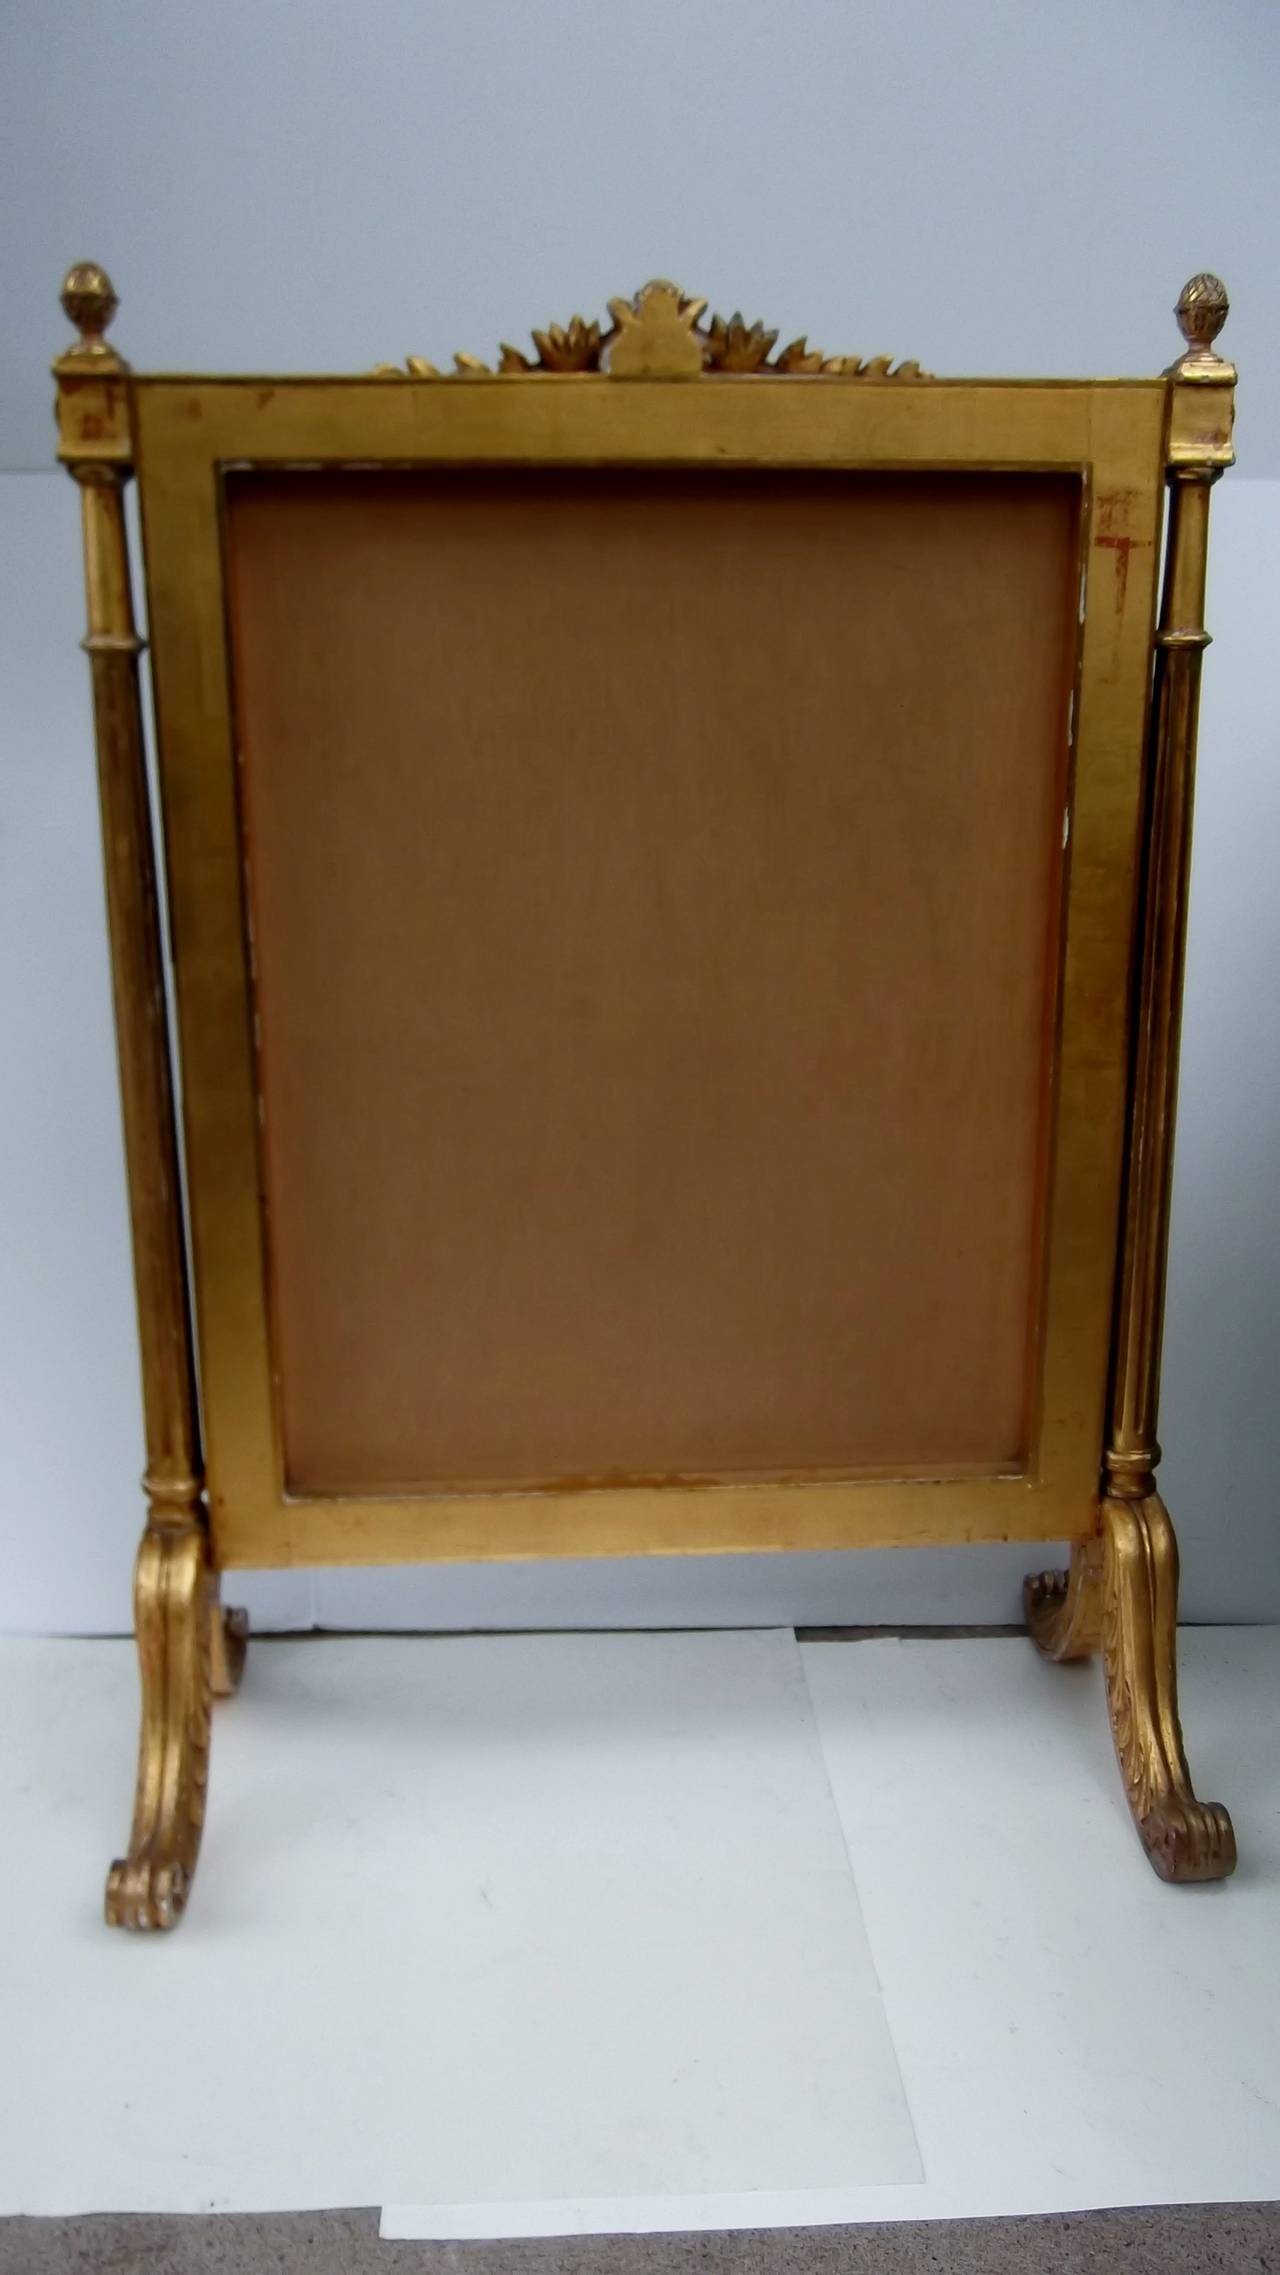 Gilt French gilt wood and needlpoint fire screen